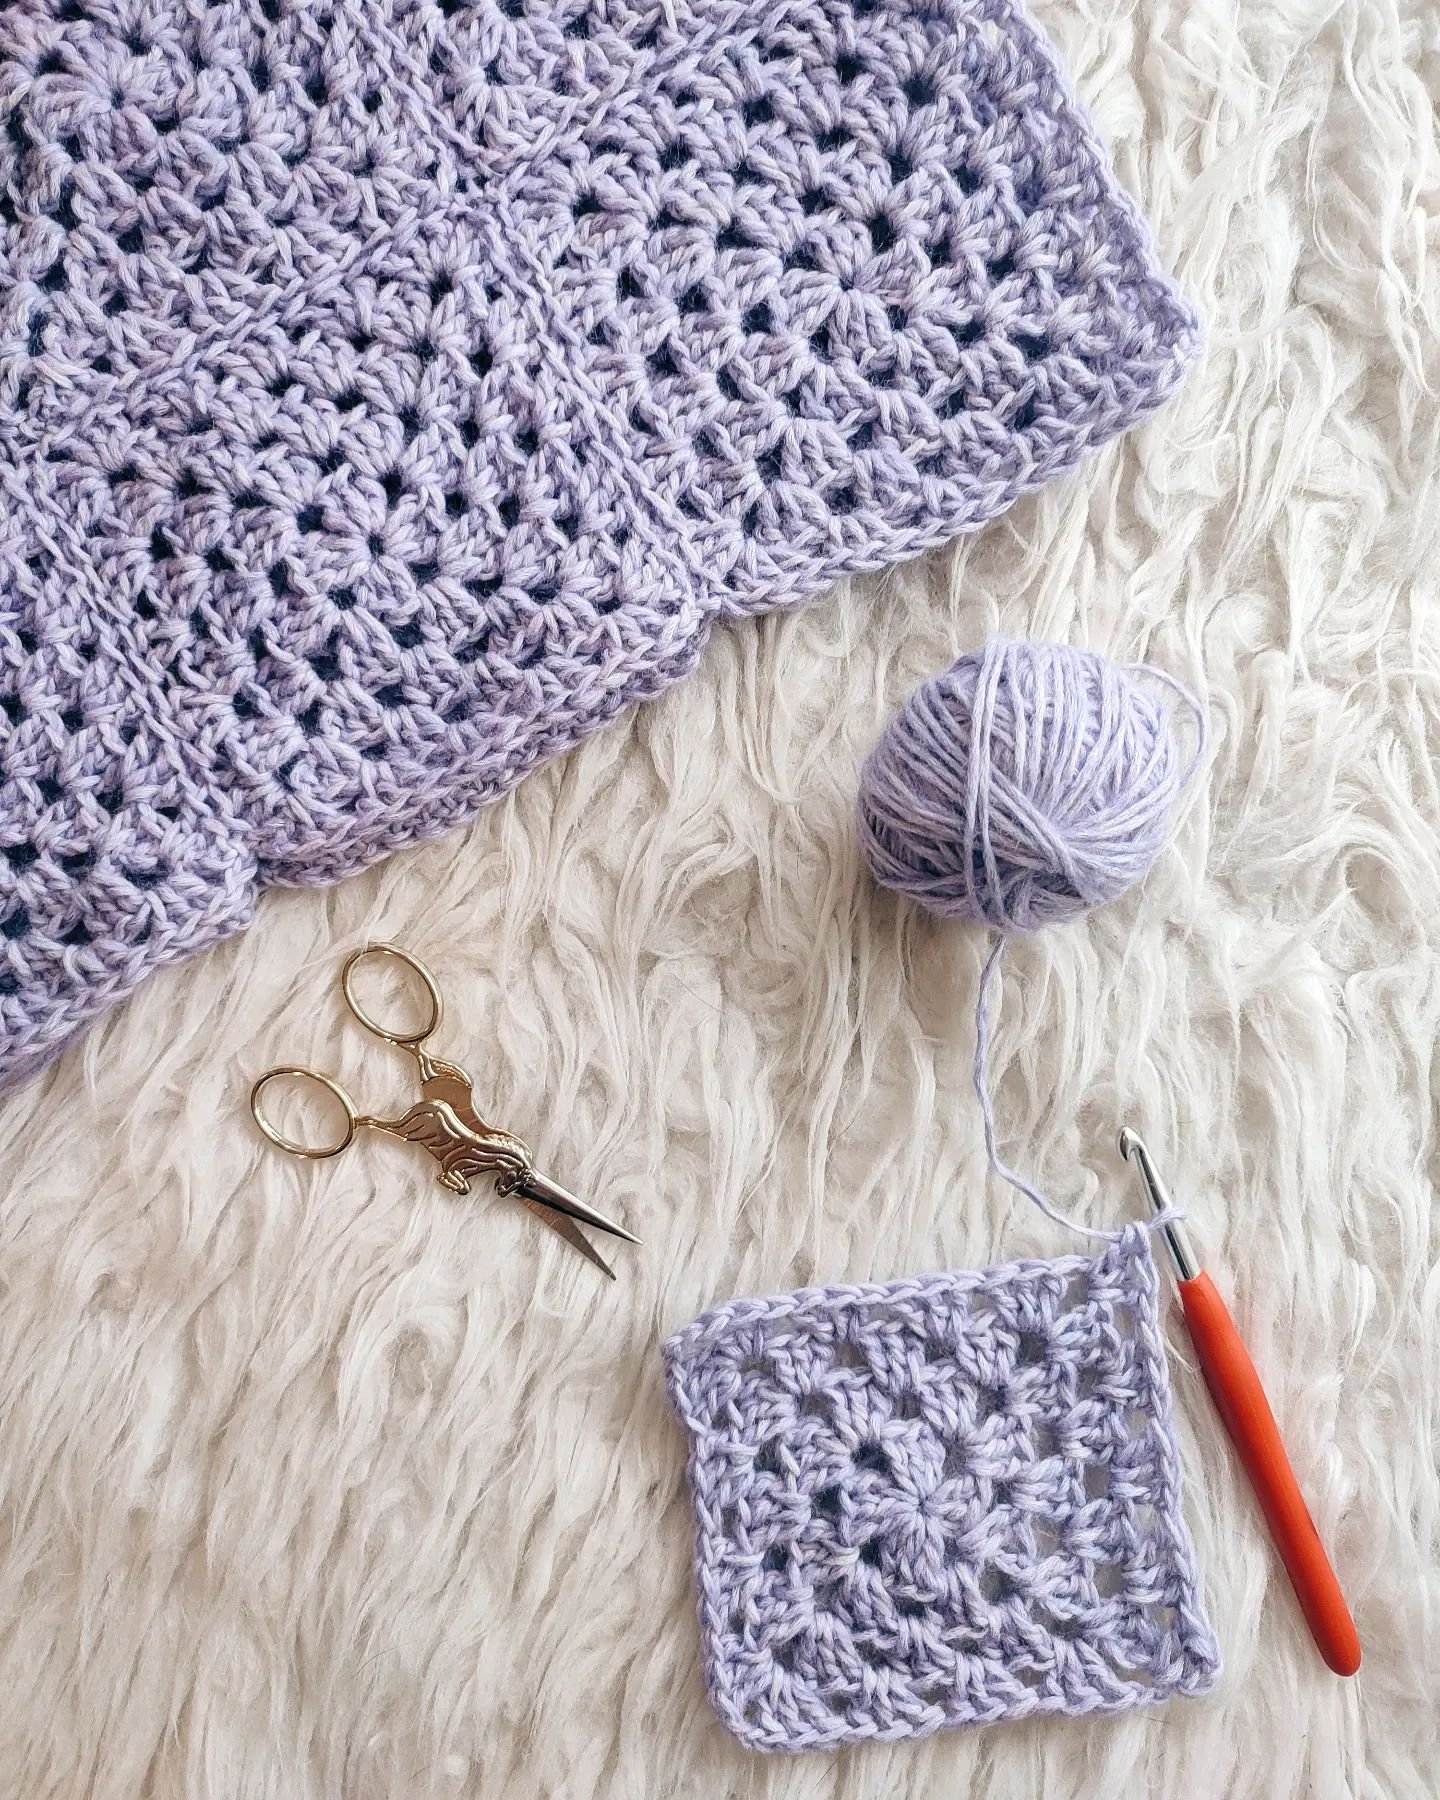 Working on a new spring cardigan today using the most pretty lavender color! 💜 Can't wait to show you more! 
.
#crochet #crochetersofinstagram
#crochetaddict #lavender #grannysquare